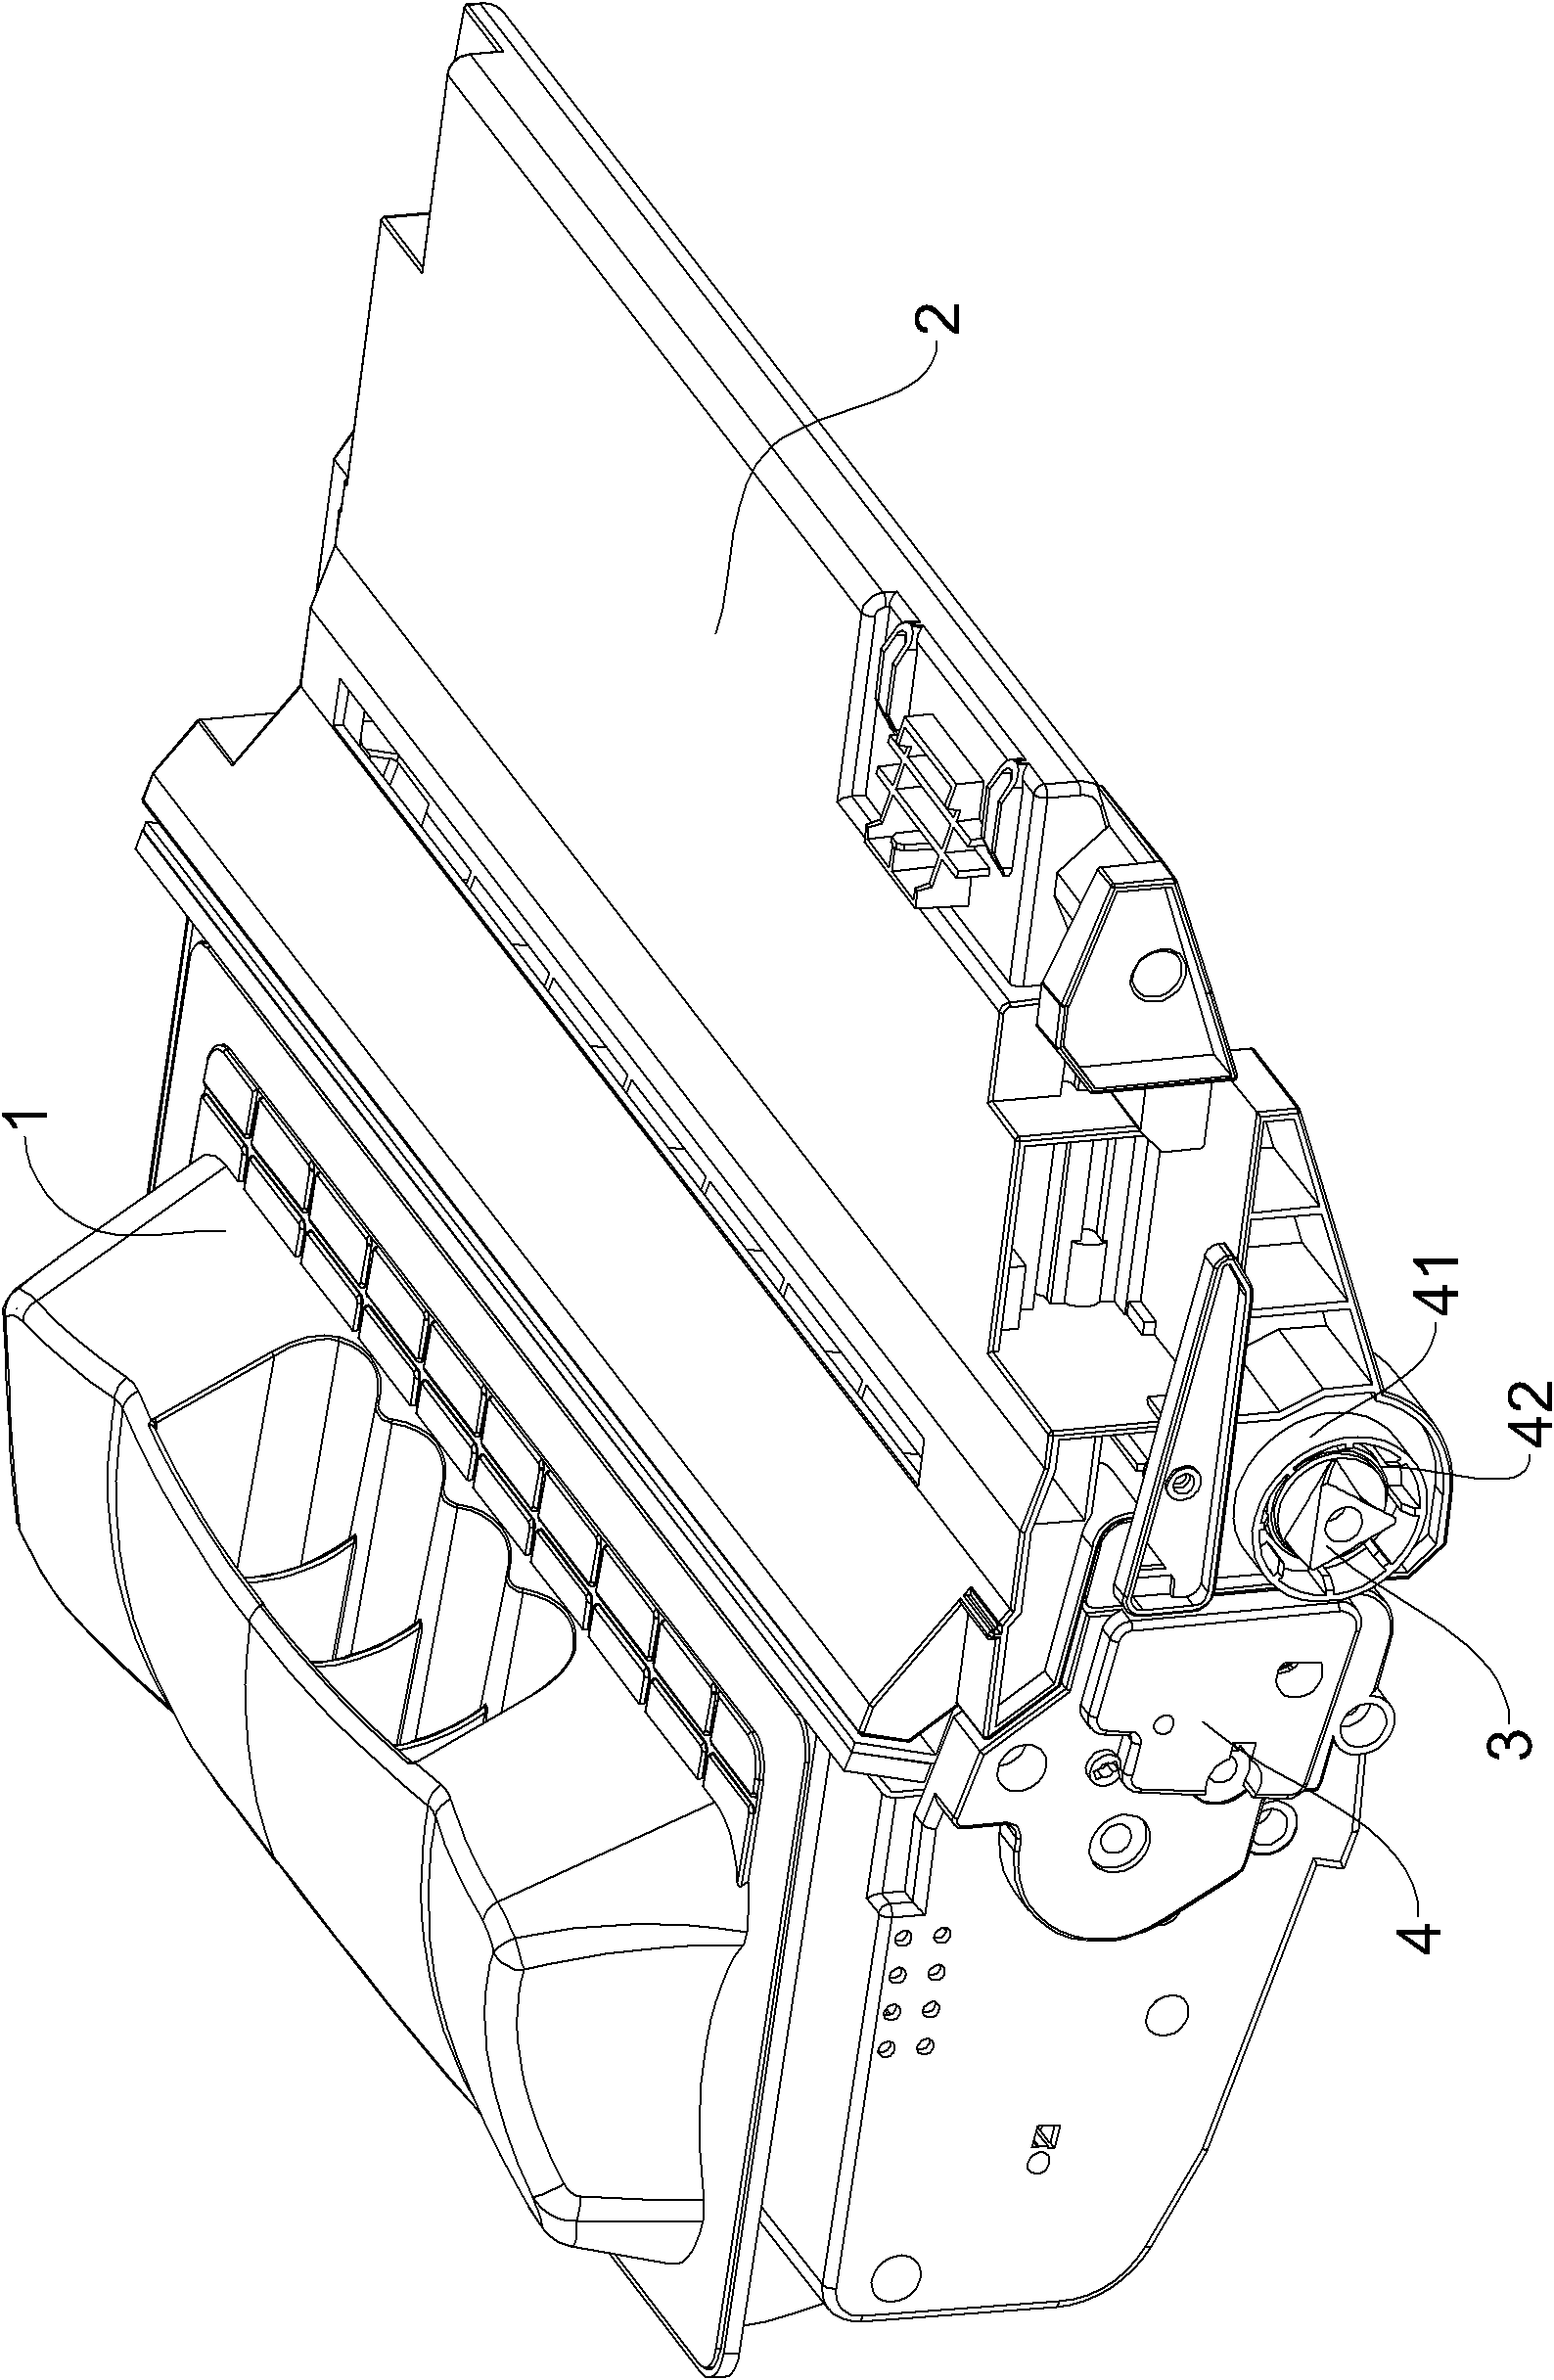 Photosensitive drum drive assembly, photosensitive drum and processing cartridge